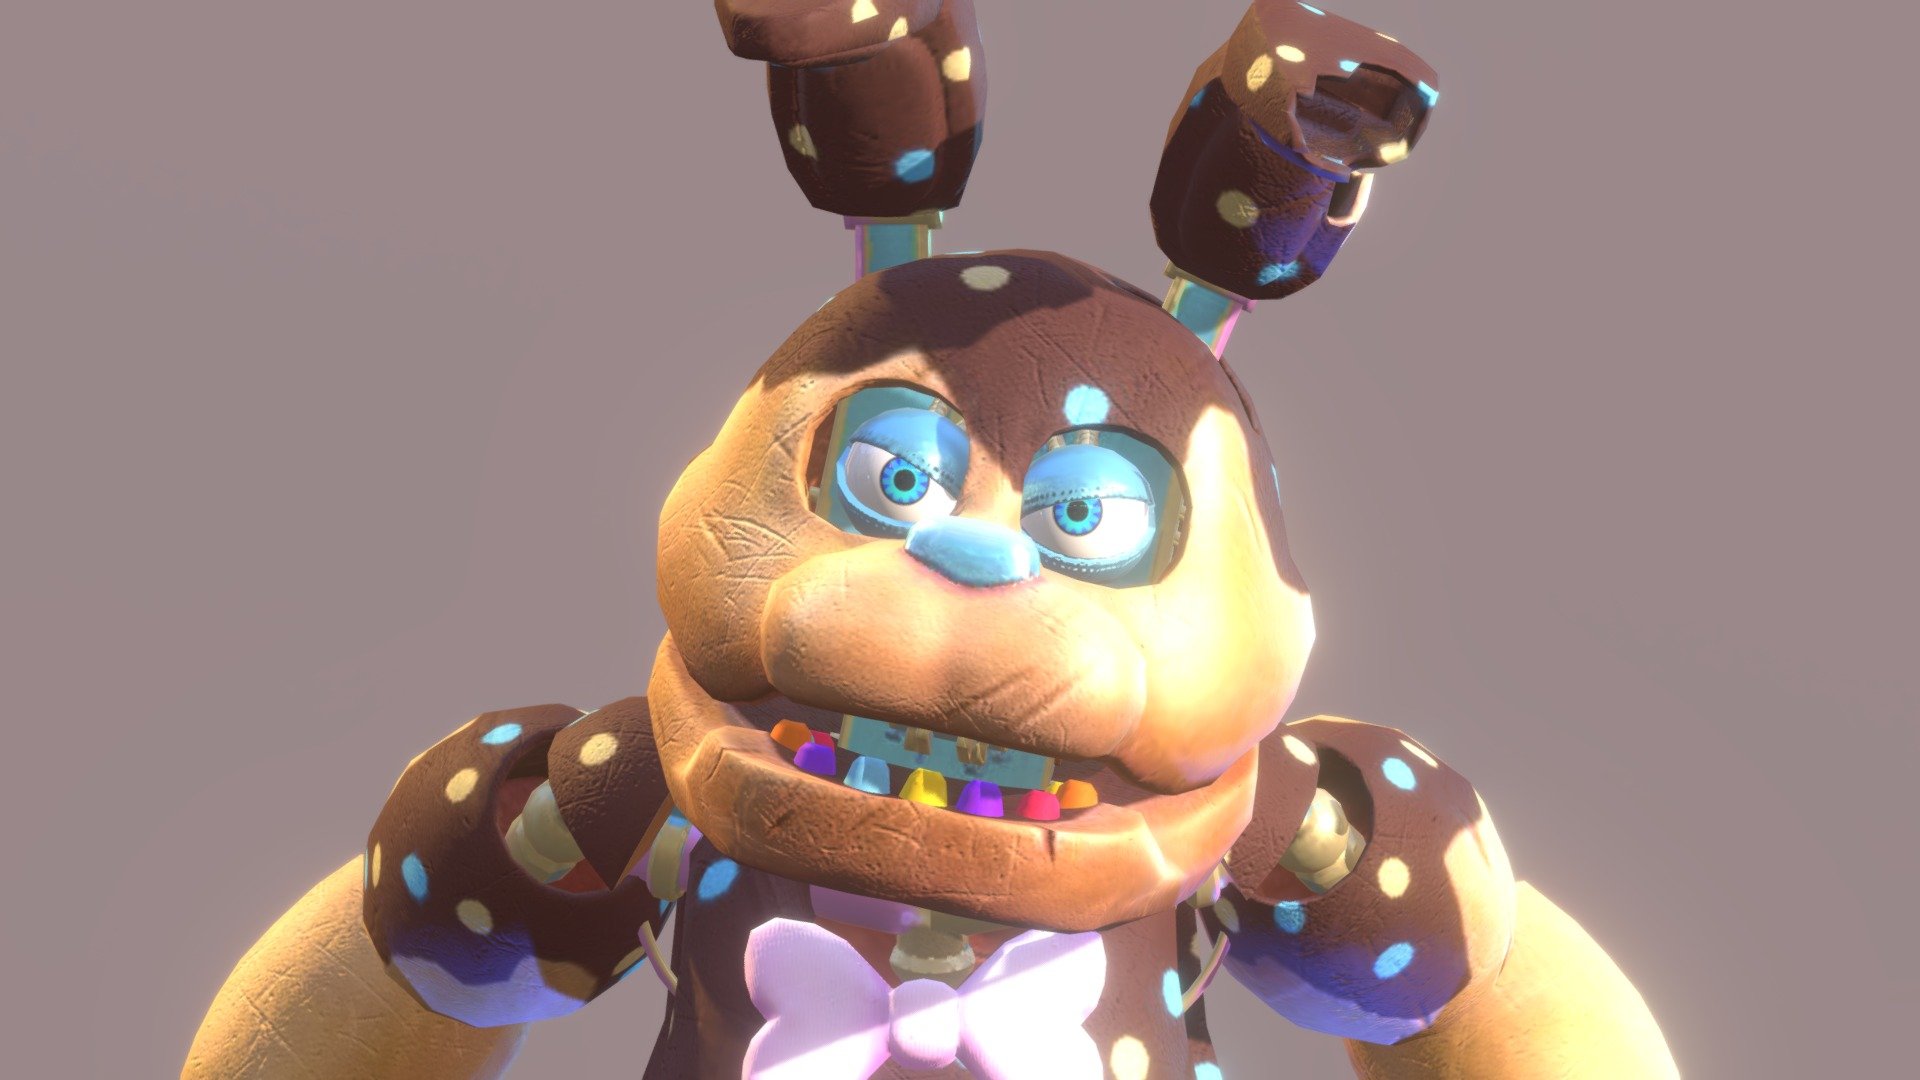 Tips : Five Nights at Candy's 6 APK + Mod for Android.